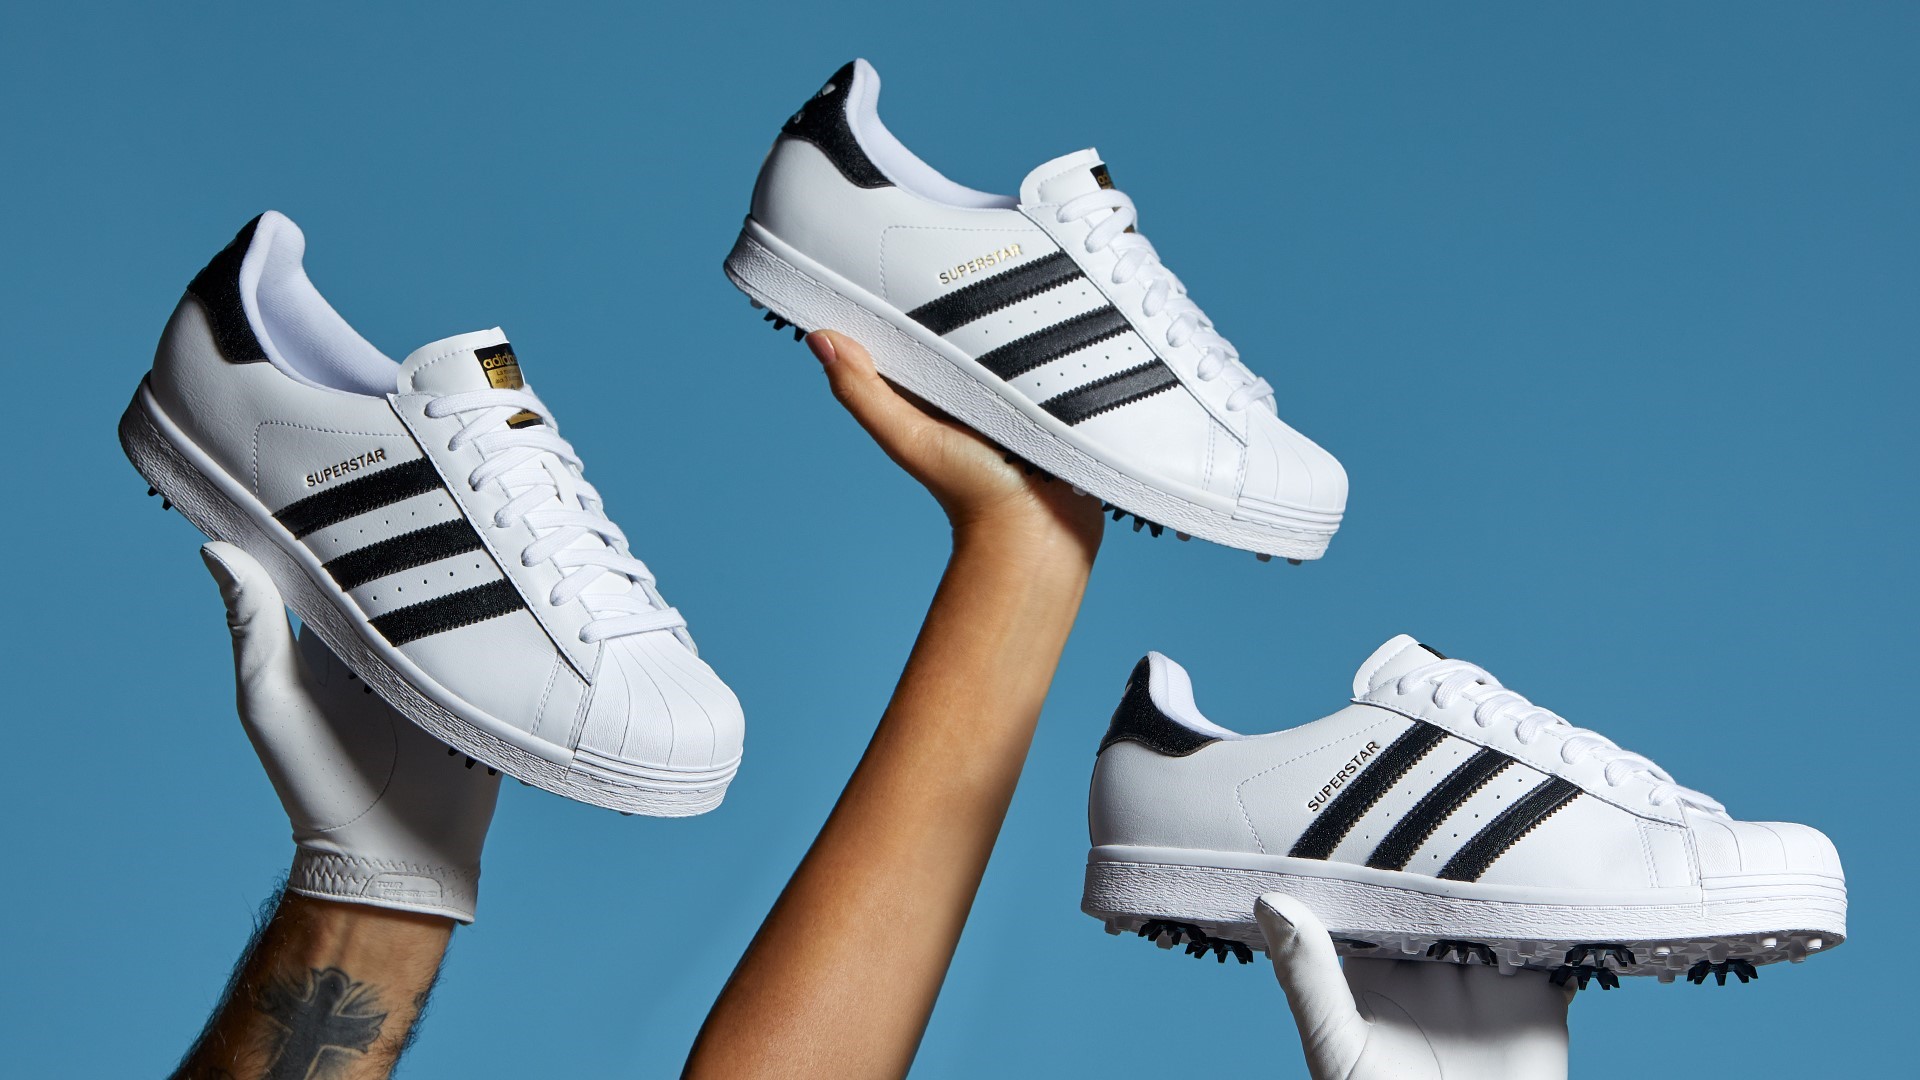 Limited Superstar Iconic 3-Stripes Footwear to the Course